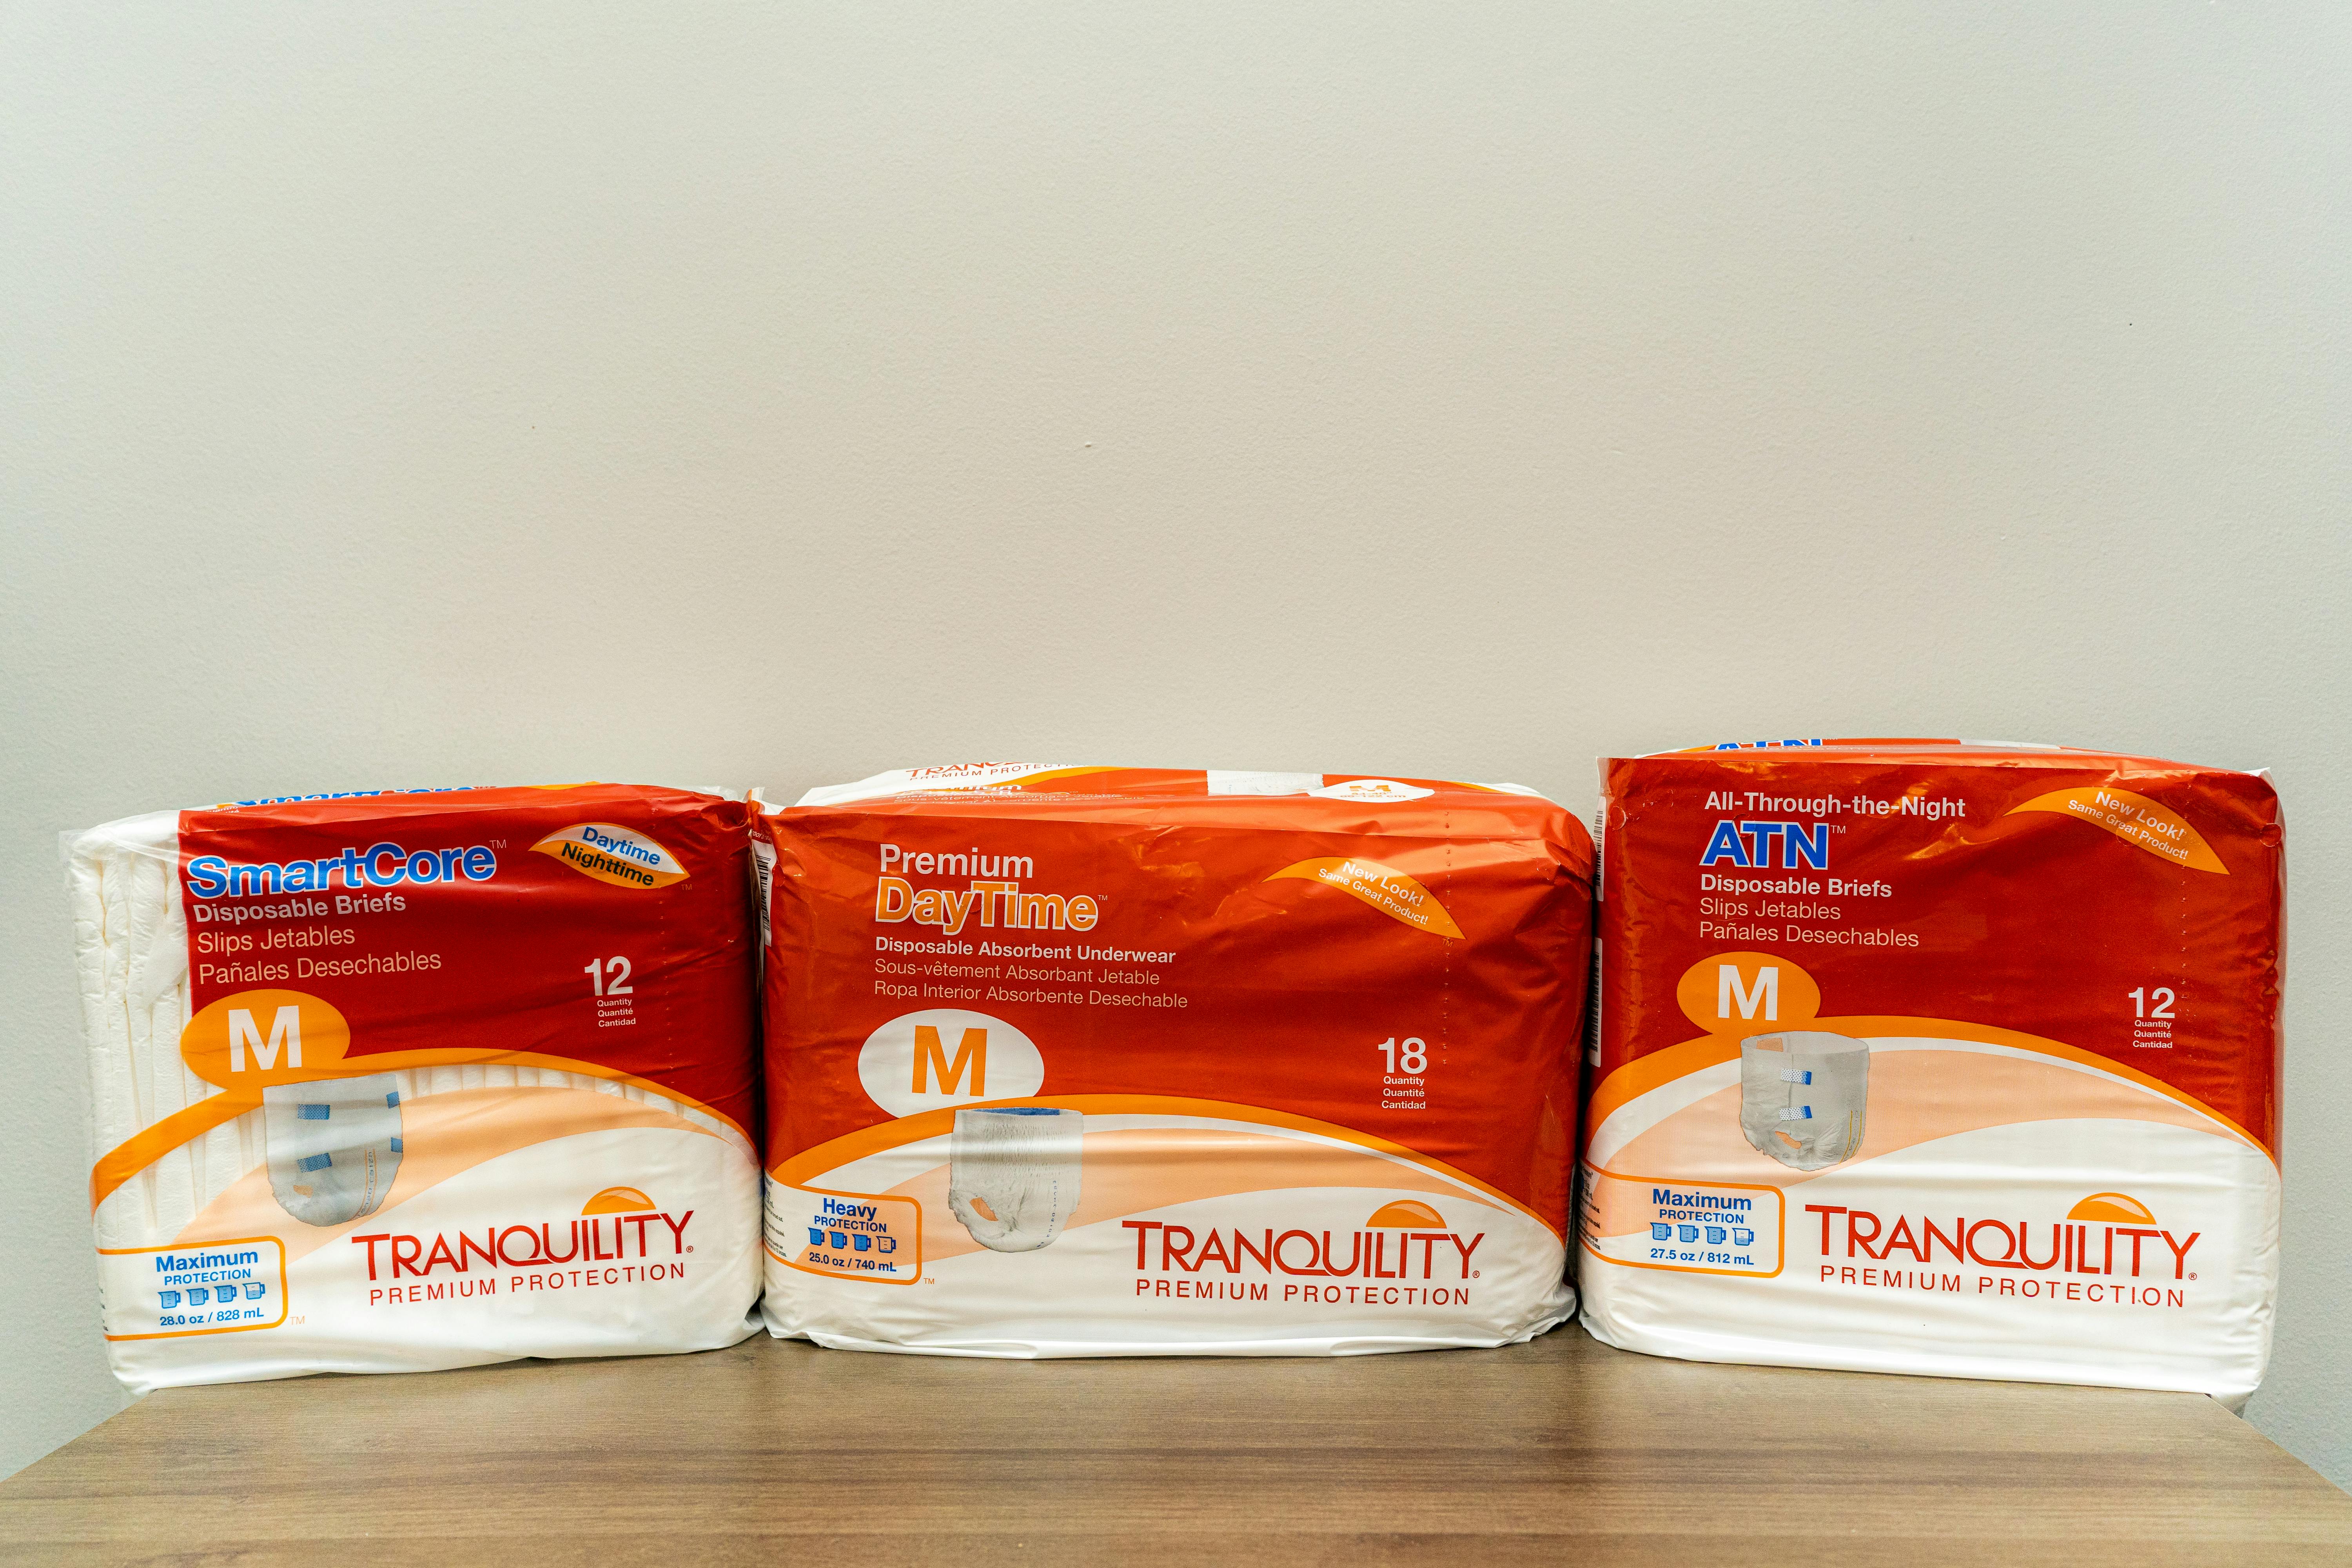 Managing Bowel Leaks? Learn the Best Men's Diapers for Fecal Incontinence.  Stay Dry and Confident.